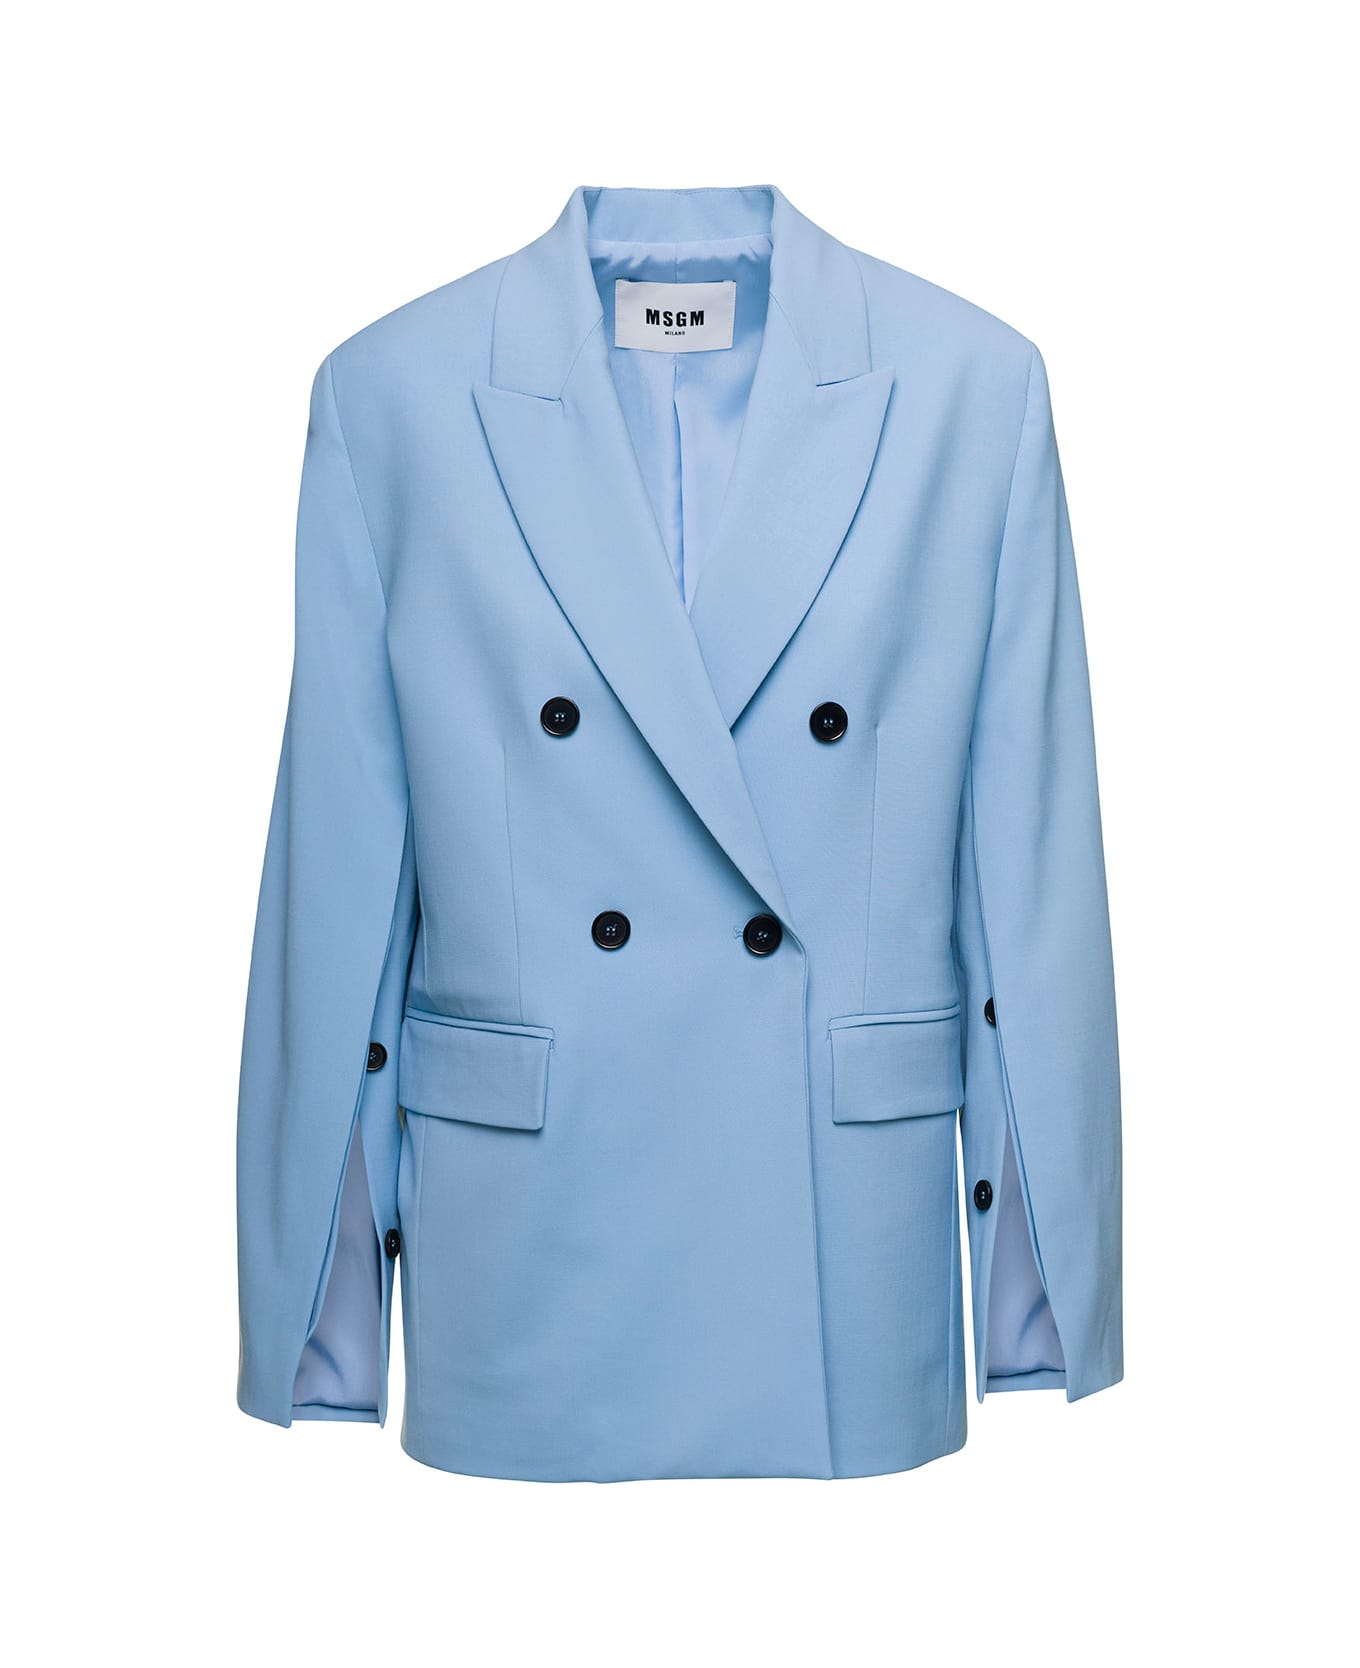 MSGM Light Blue Double-breasted Jacket With Buttoned Sleeves In Stretch Wool Woman - Blu ブレザー